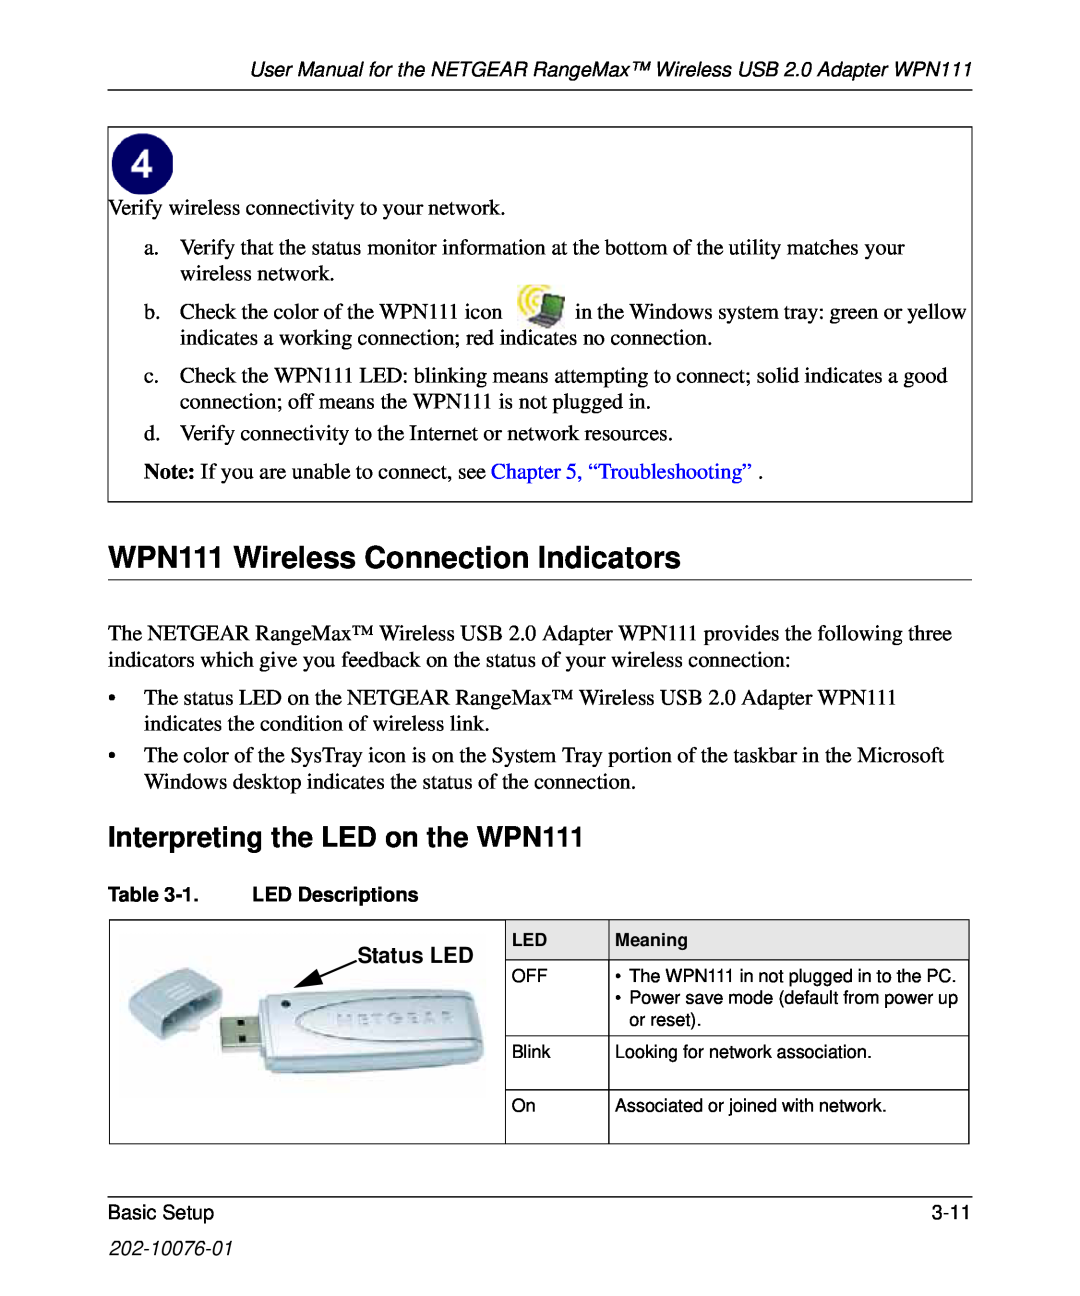 NETGEAR user manual WPN111 Wireless Connection Indicators, Interpreting the LED on the WPN111, Status LED 